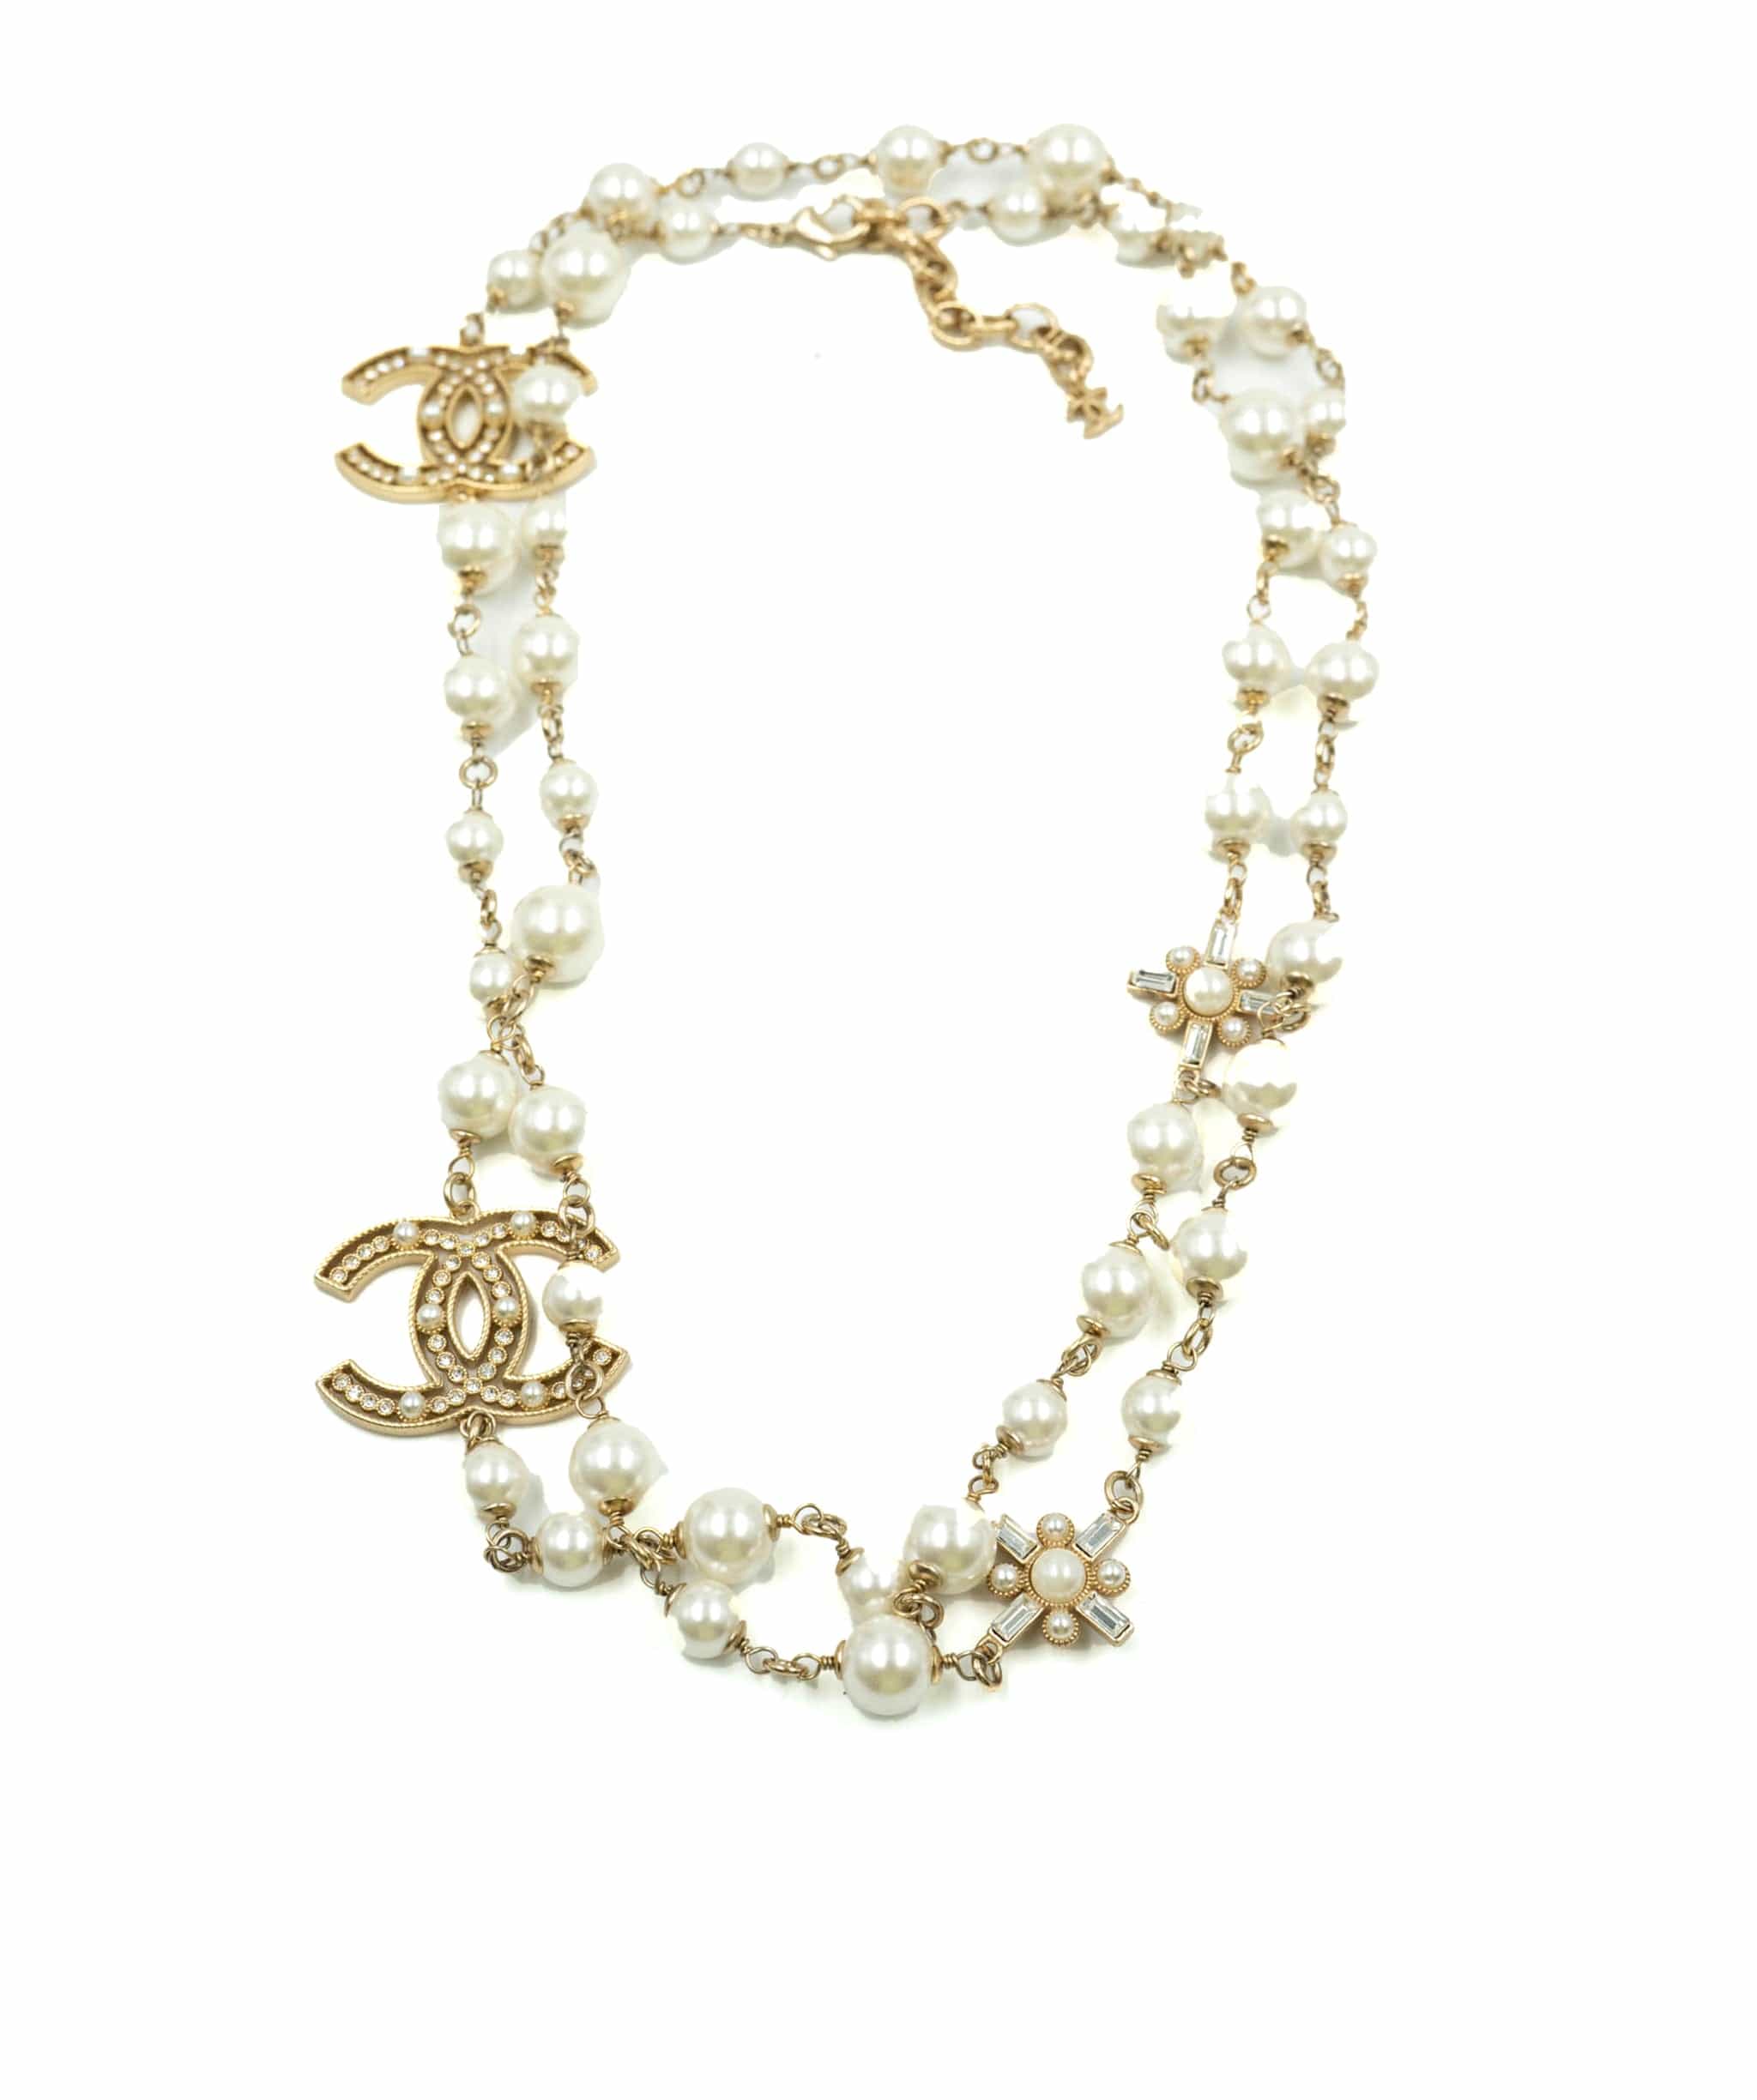 Chanel Chanel CC pearl necklace with CC logo's - AWL3869